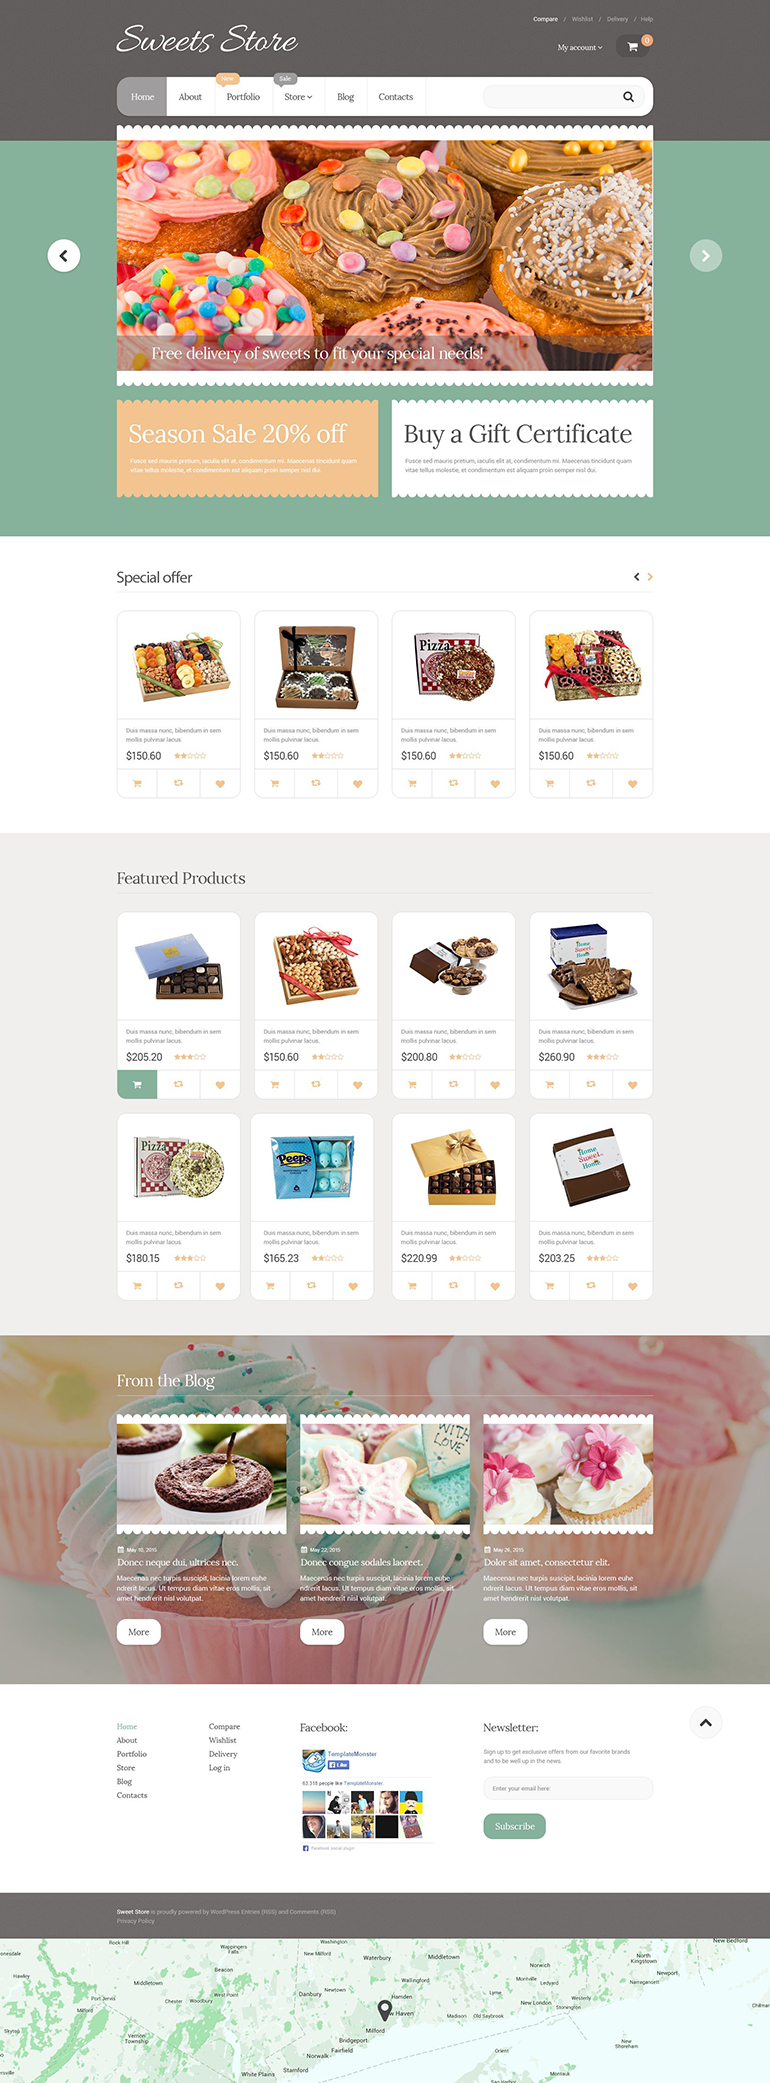 15+ Best WordPress Themes For Your eCommerce Website 2